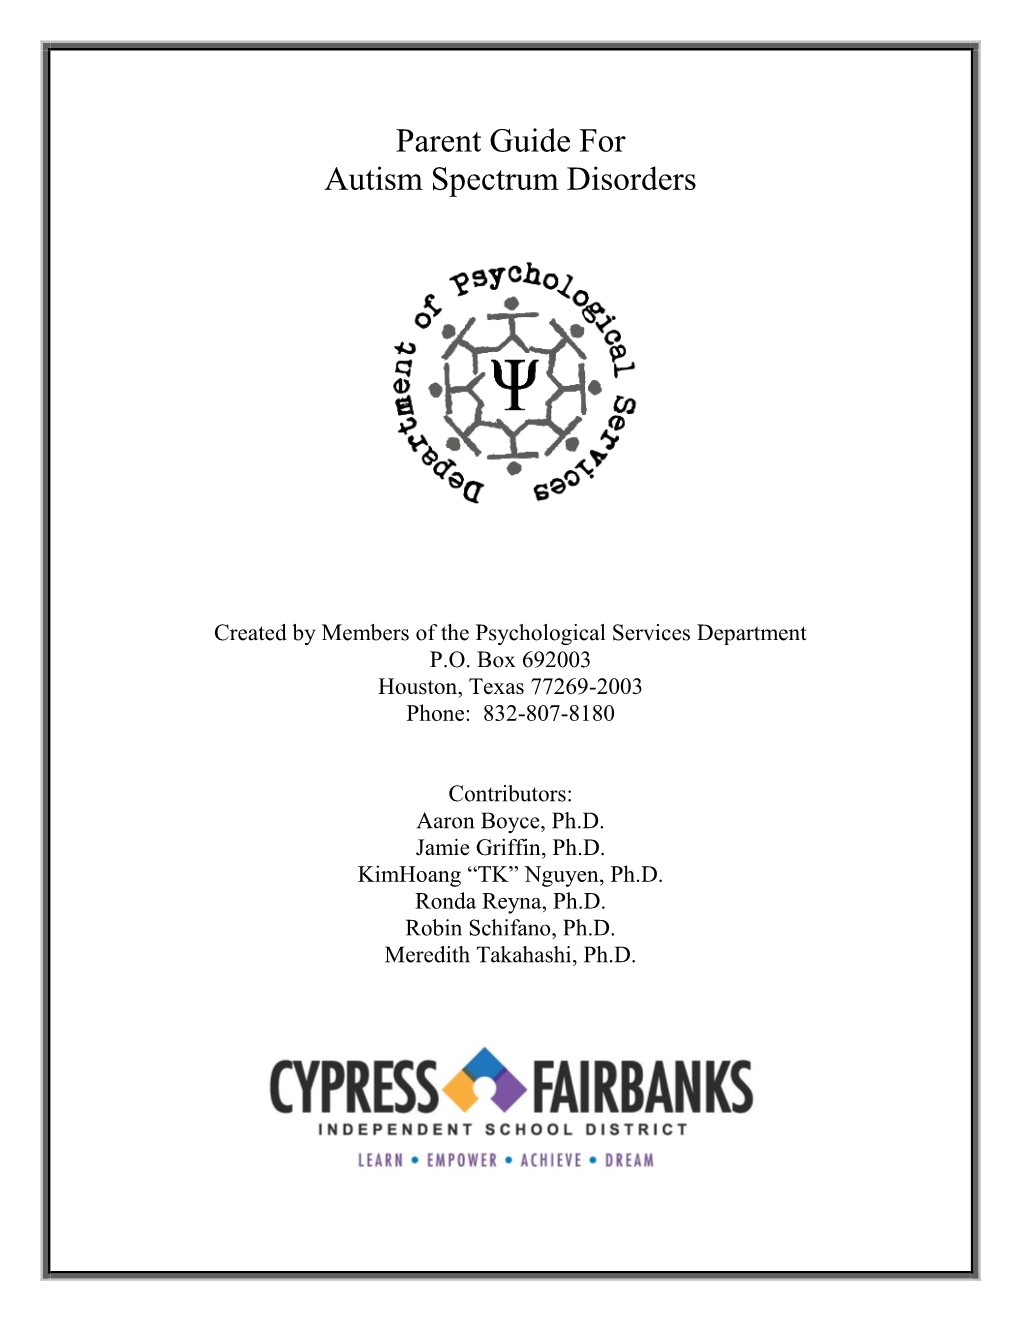 Parent Guide for Autism Spectrum Disorders